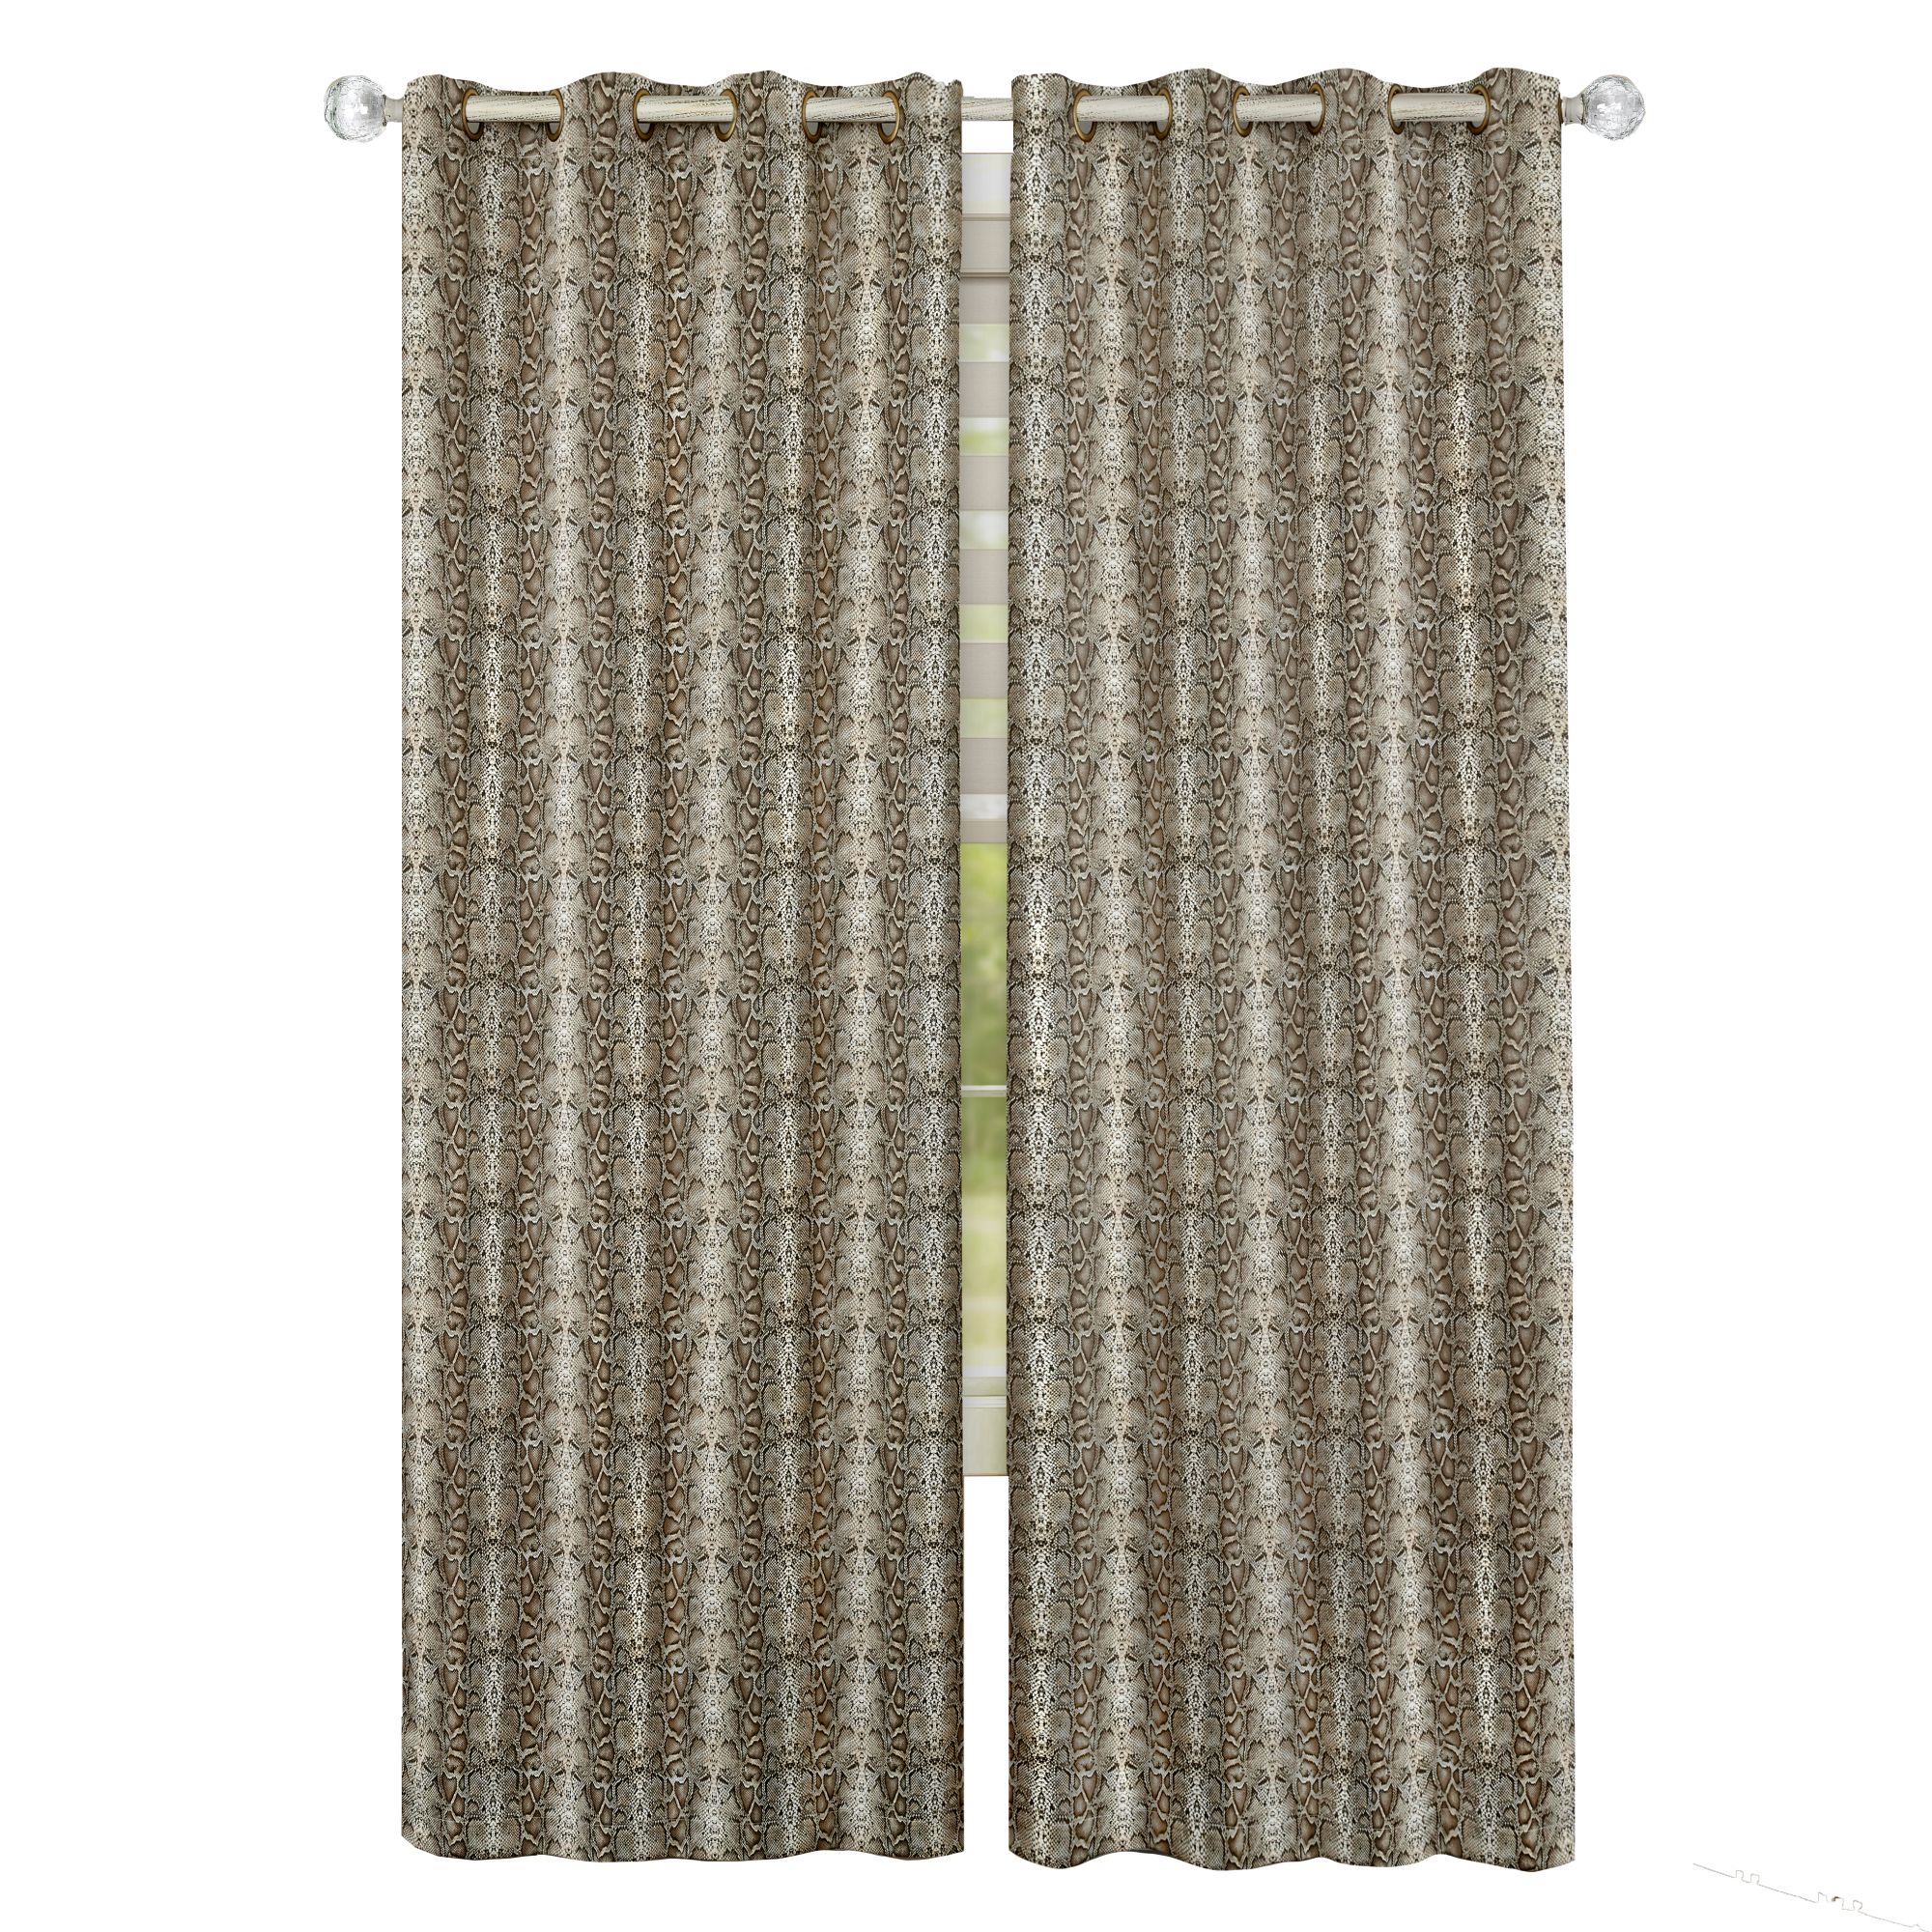 Achim Python Polyester Blackout Window Curtain Panel, Brown/Gold, 52" x 84" - image 3 of 5